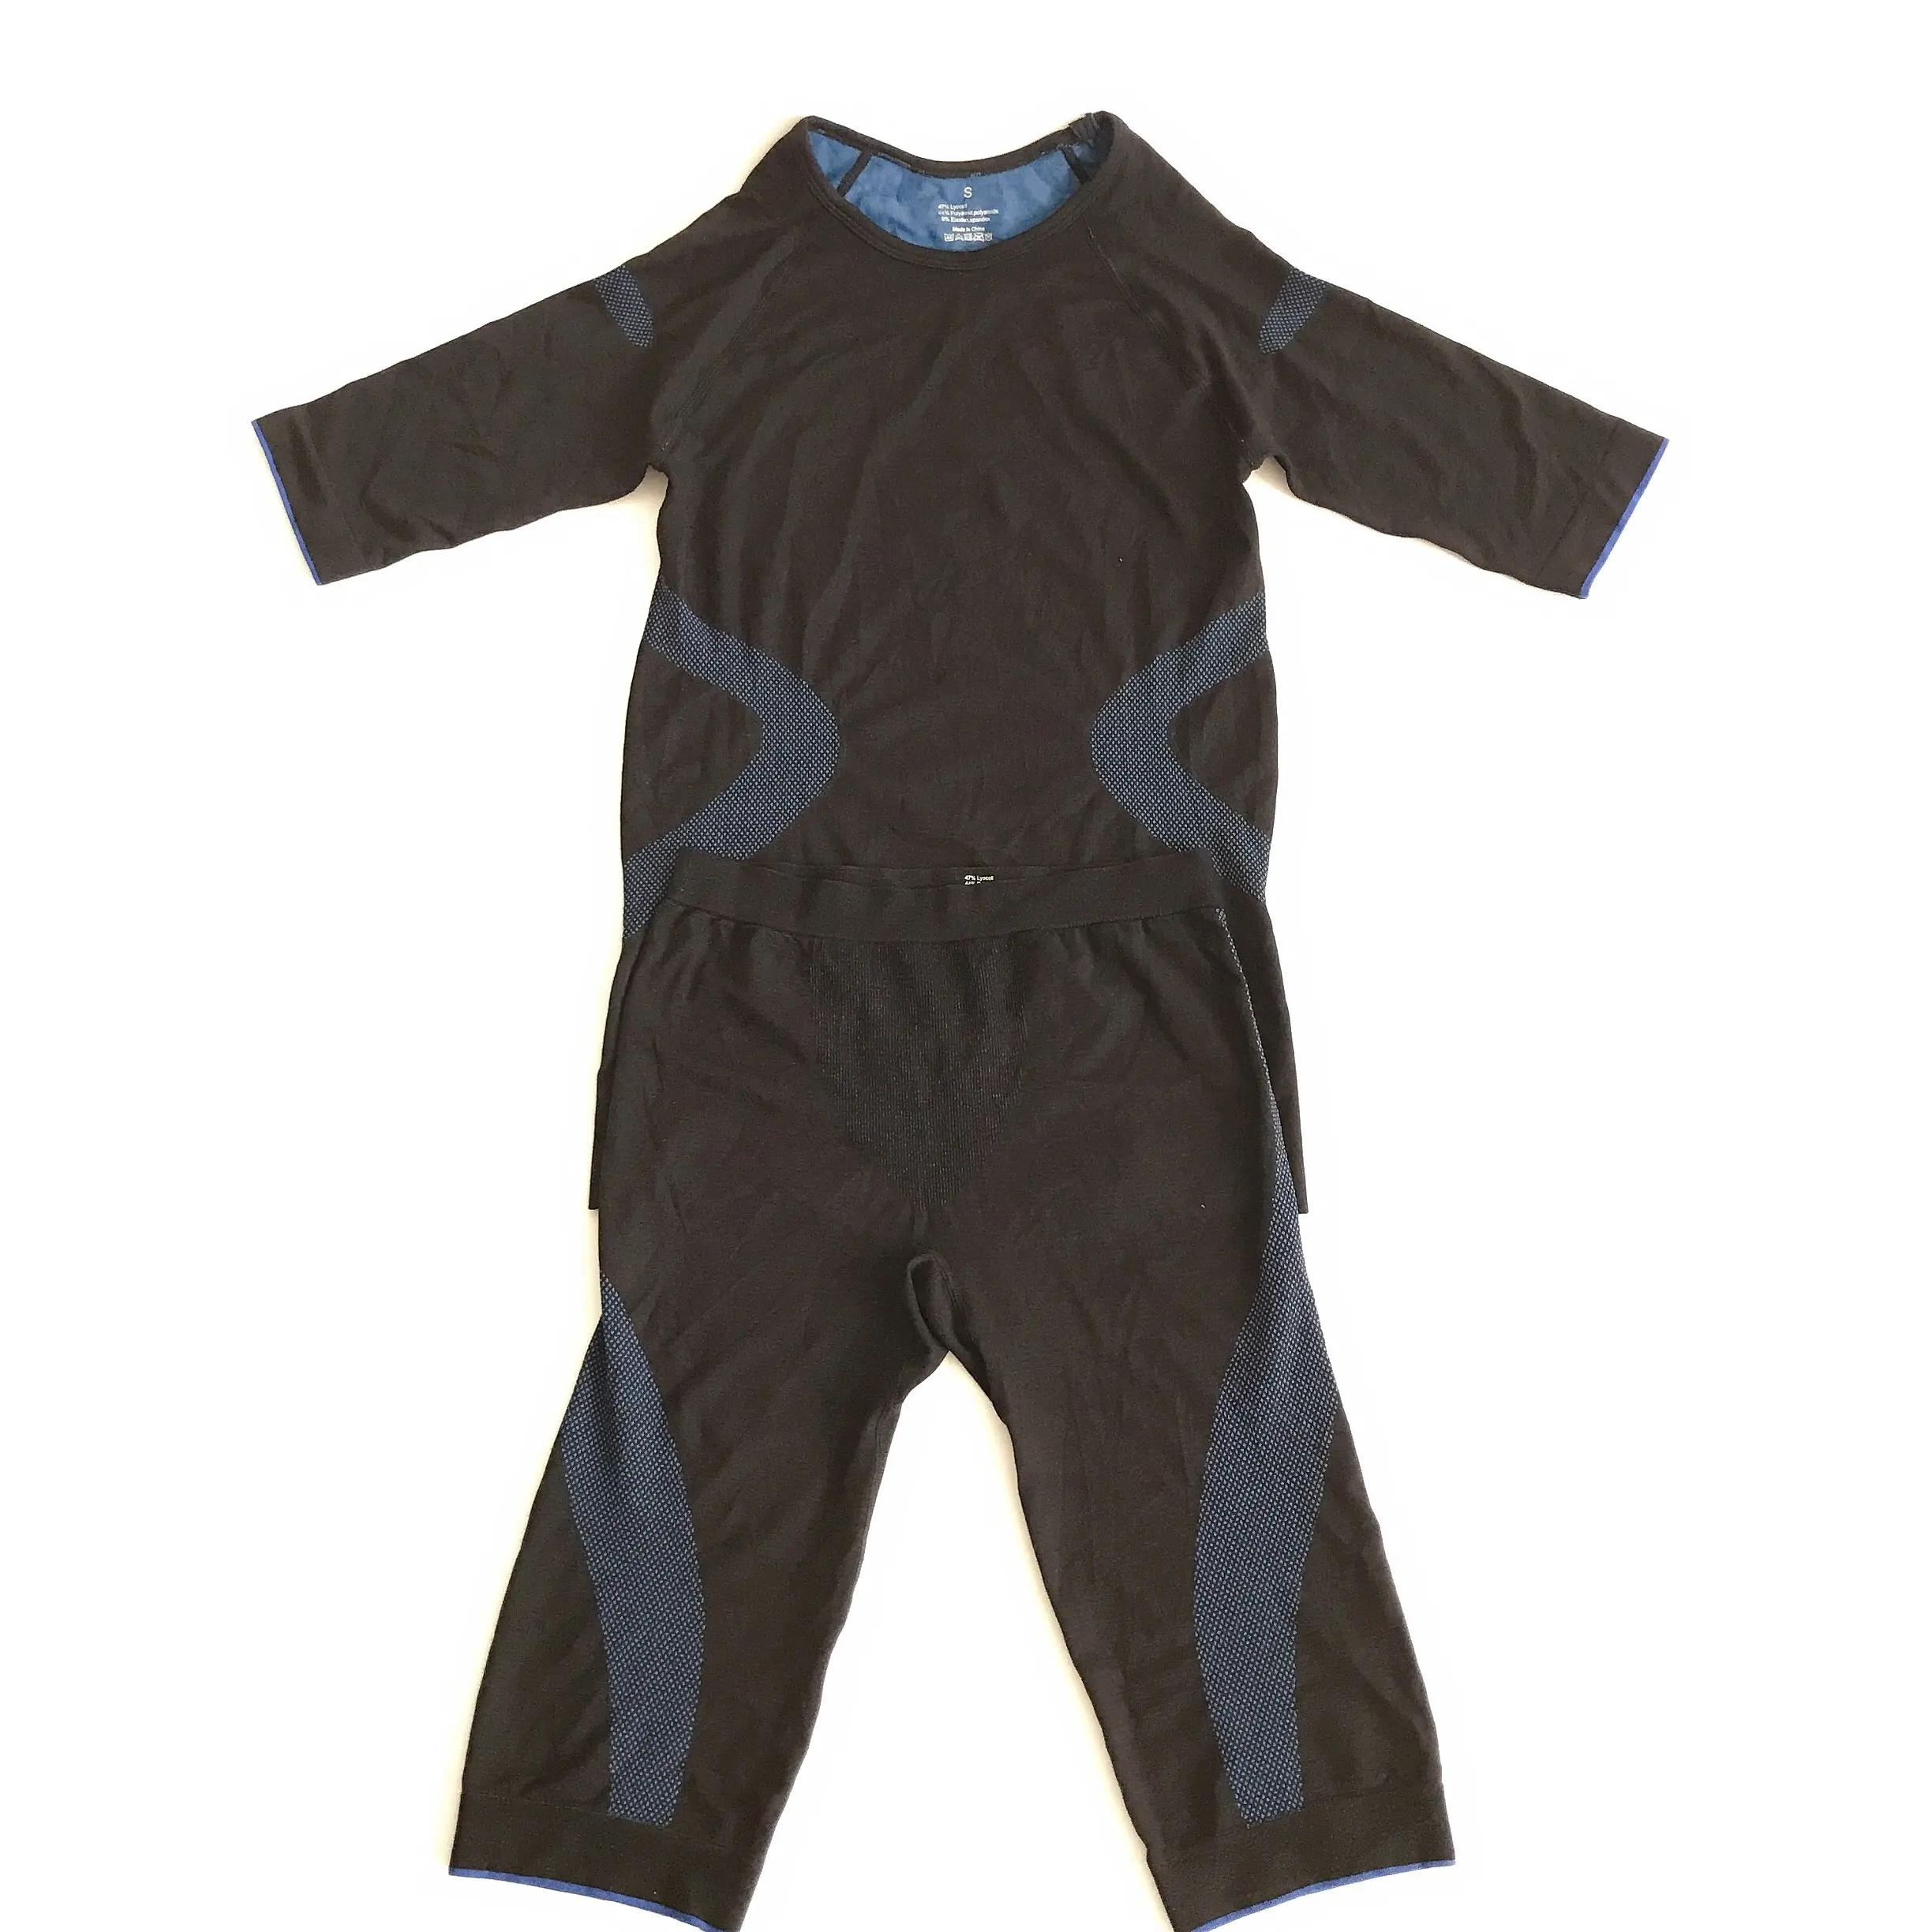 Blue&Black X Body Ems Training Suits Wireless Ems Suit Xbody Ems Suit